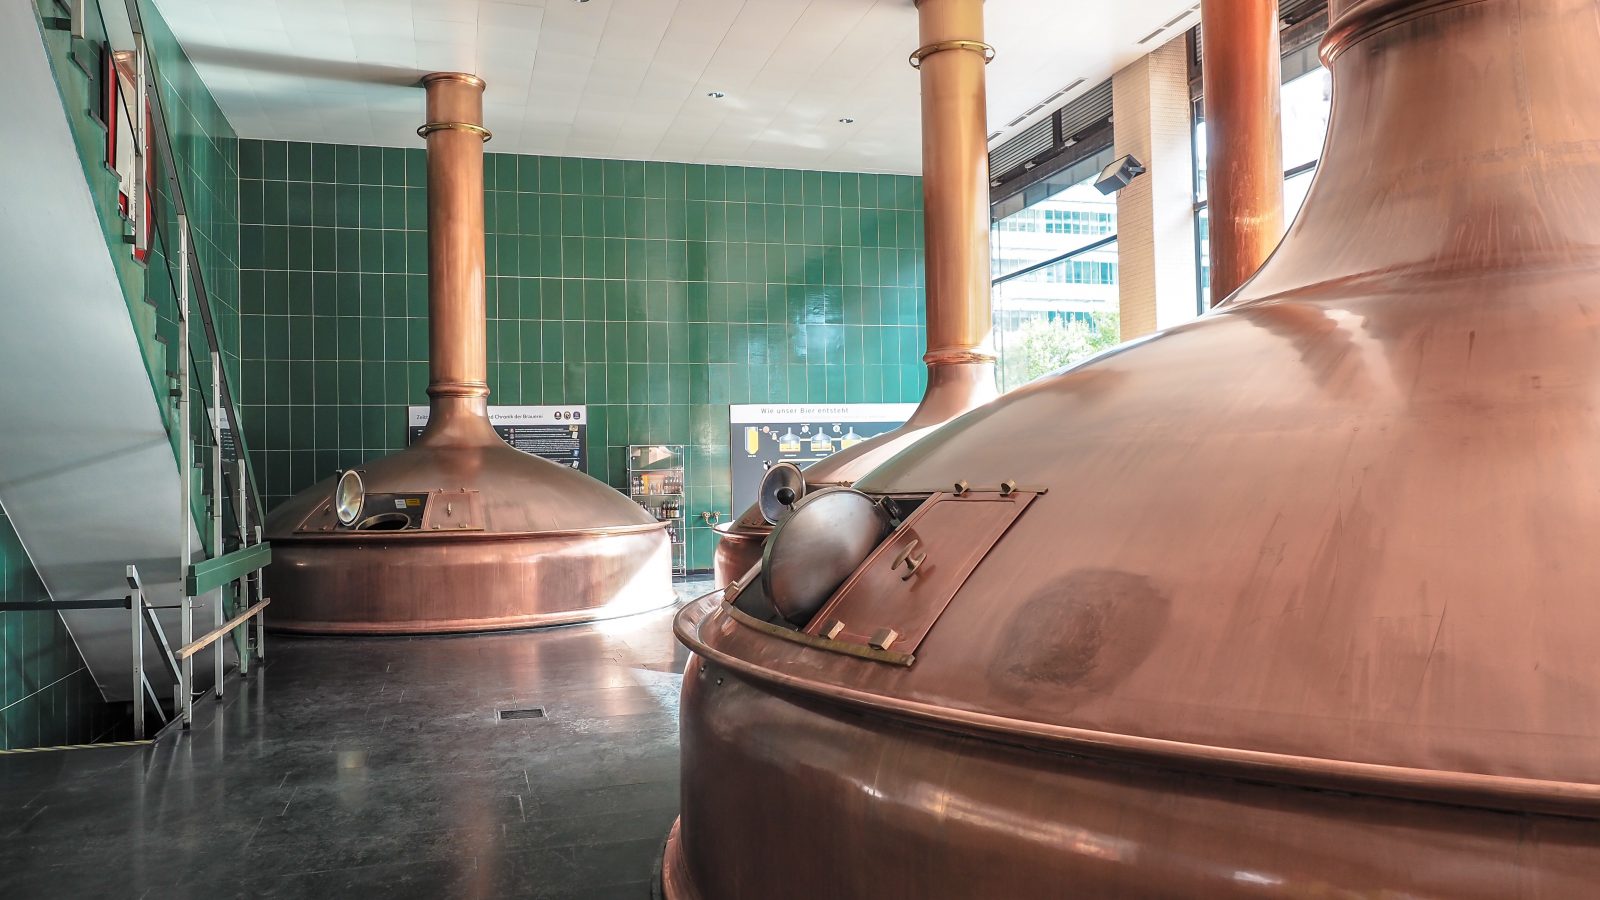 Taking a Spaten Brewery tour in Munich, Germany: Everything NOT to do / How not to take a Spaten brewery tour